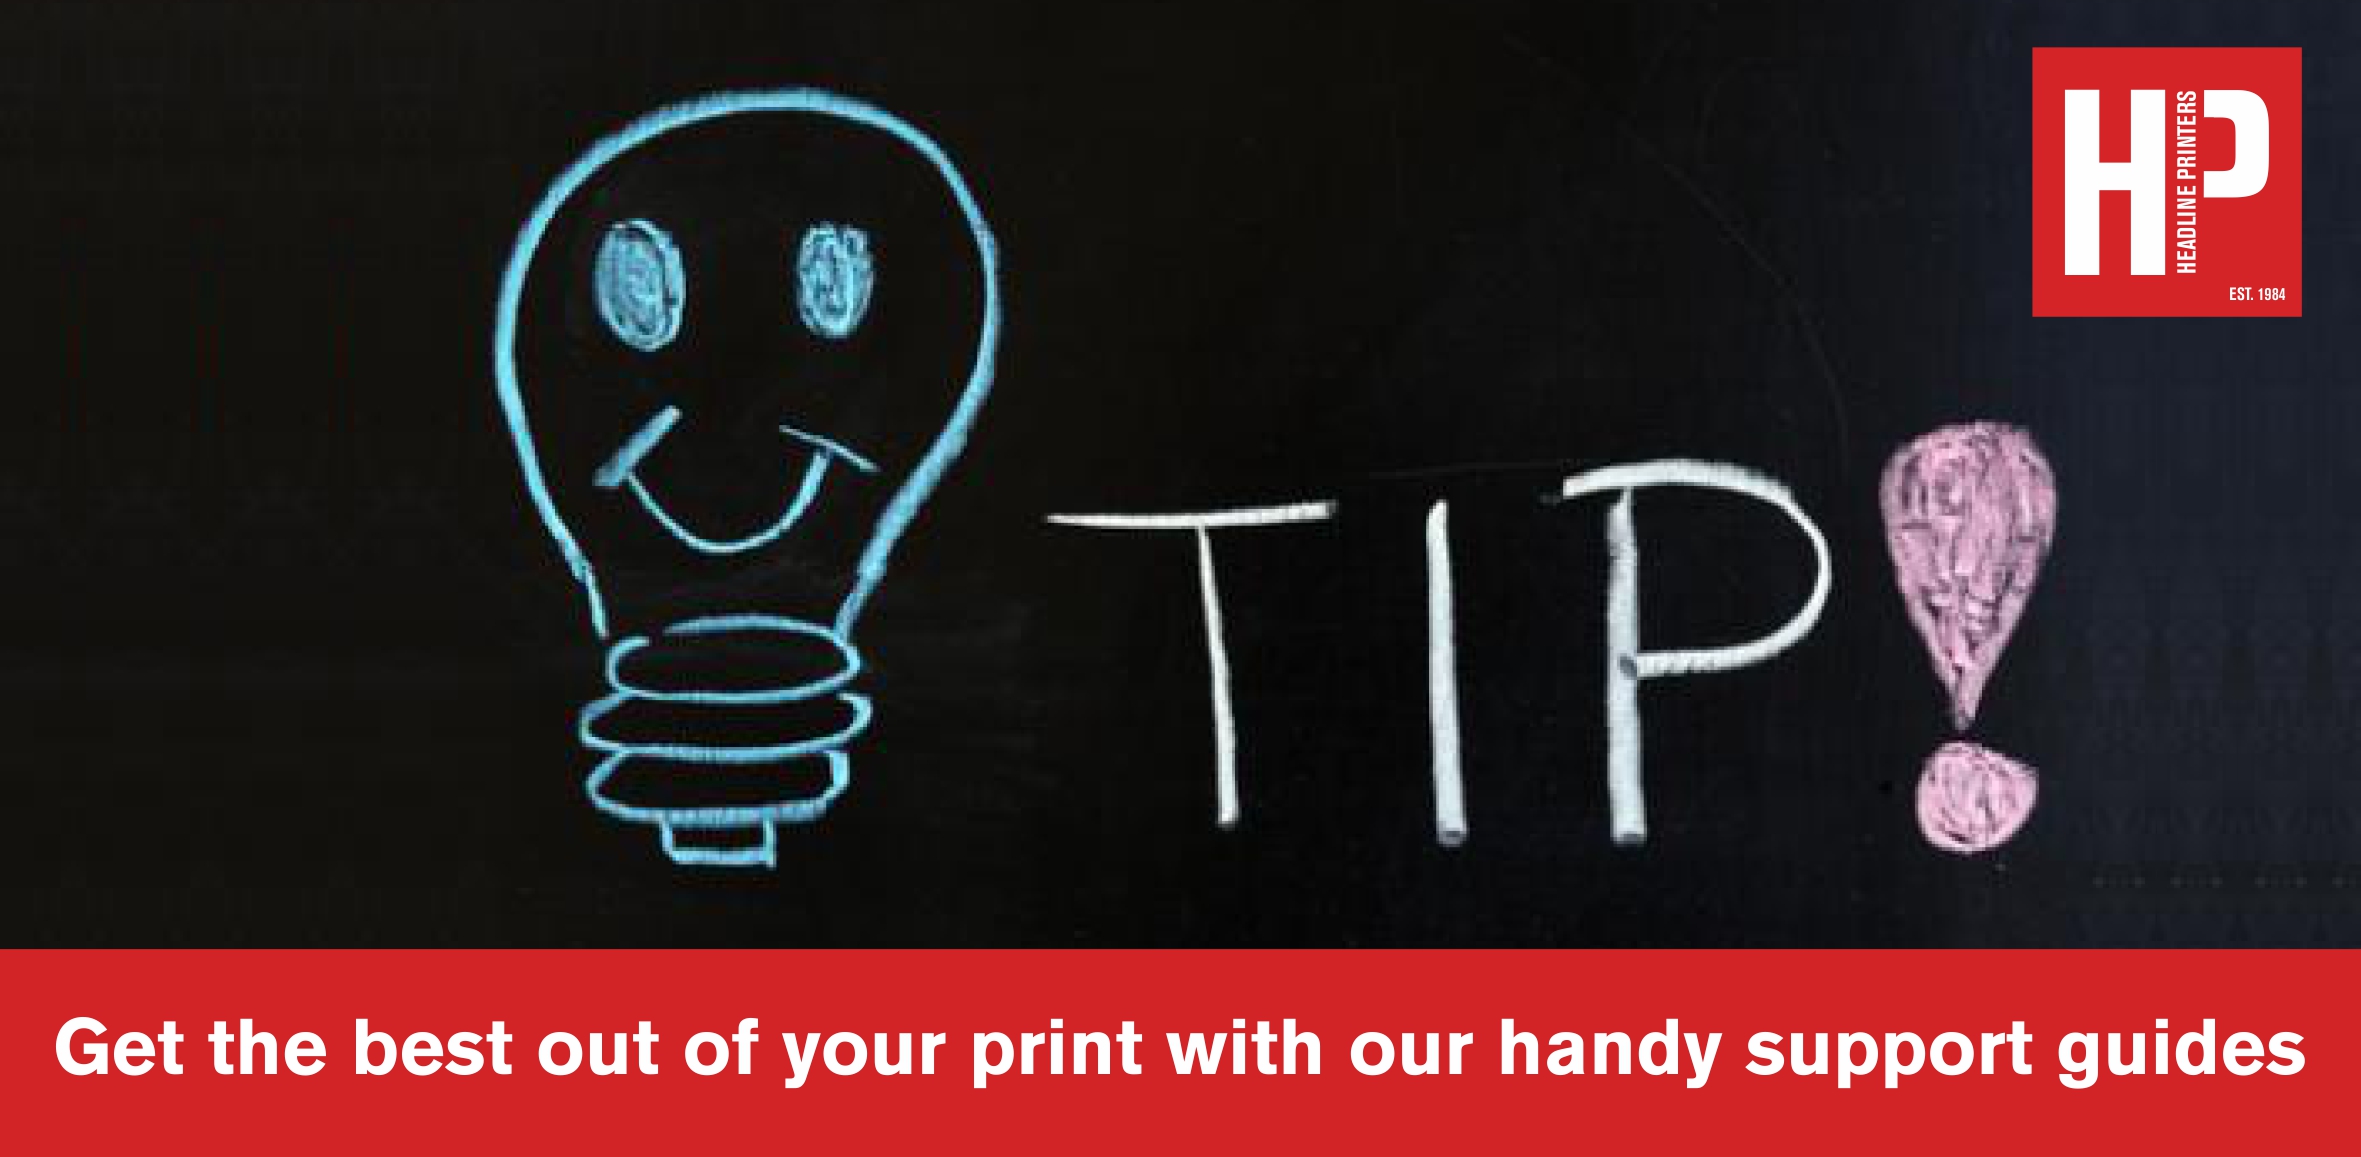 Get the best out of your print with our support guides